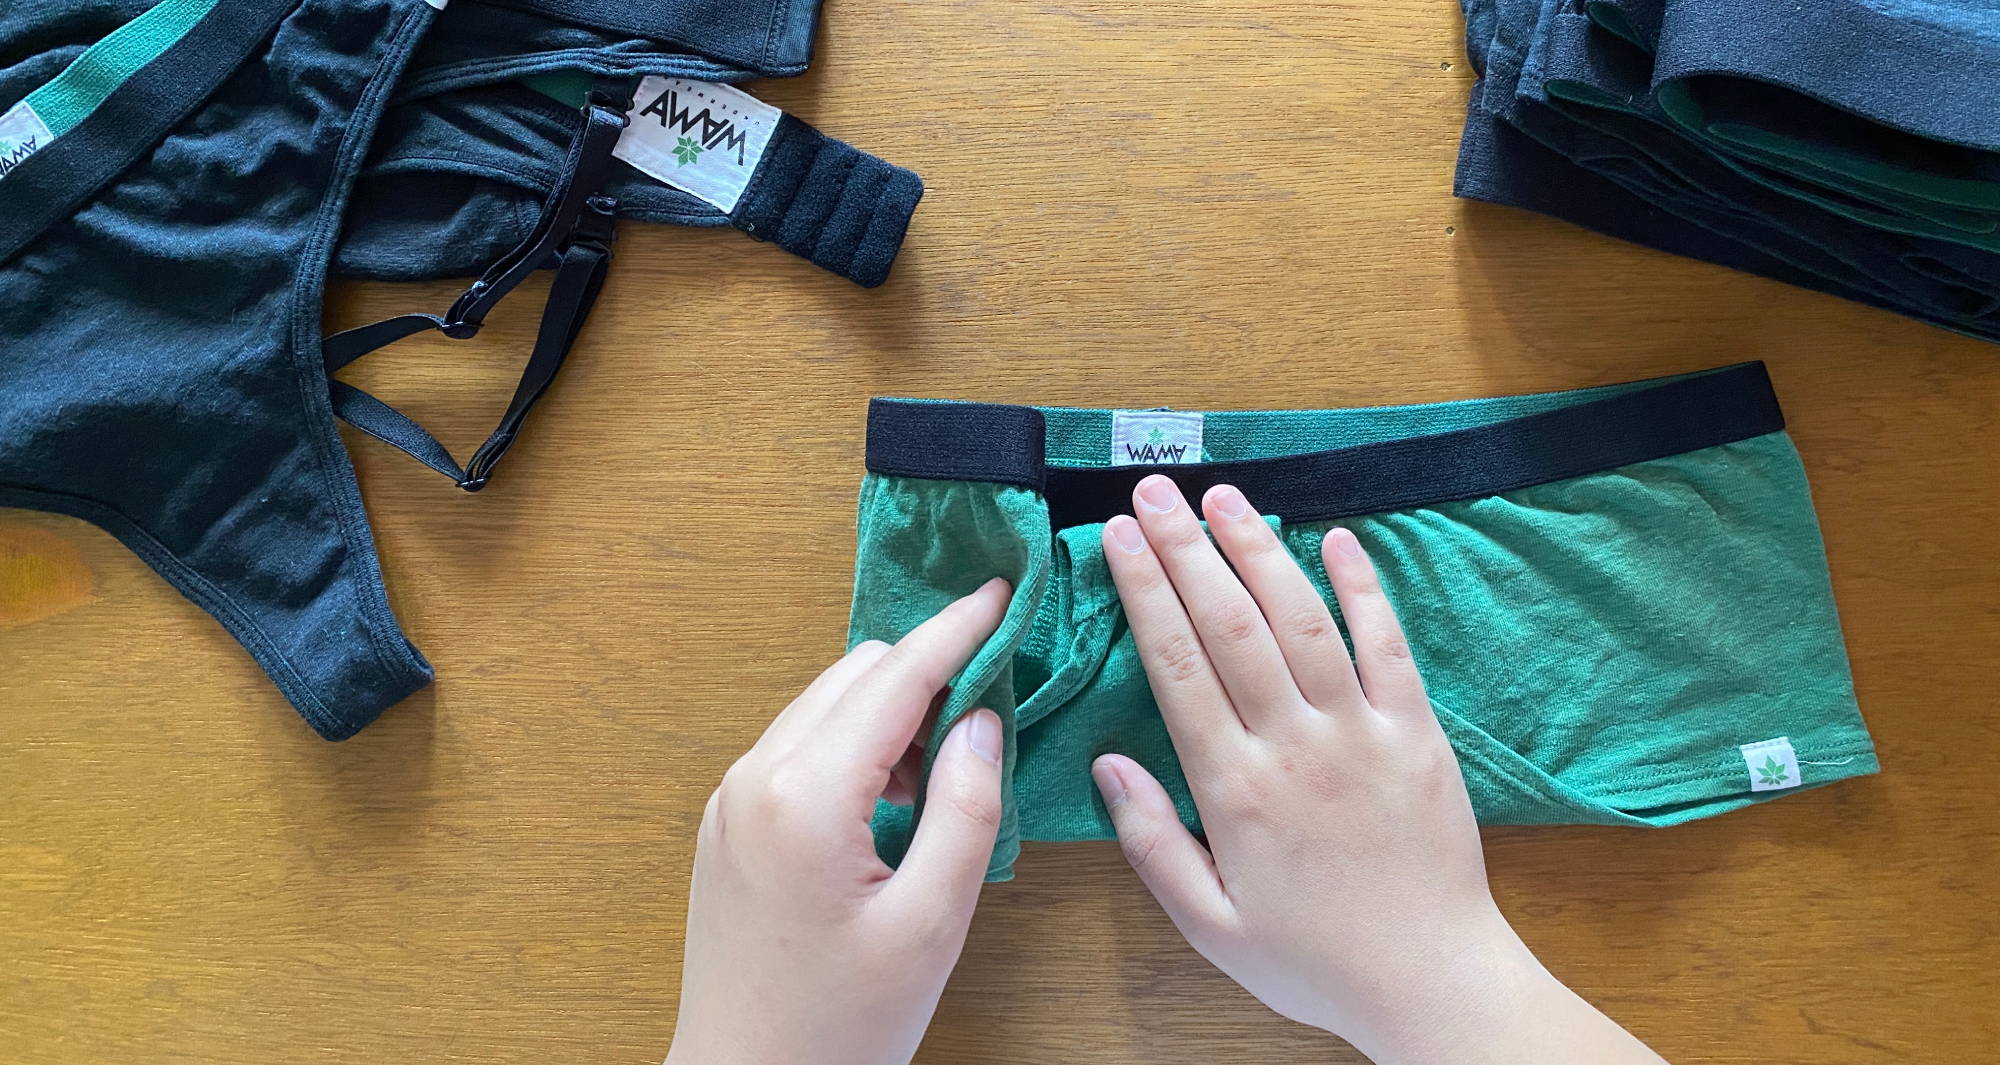 A person’s hands folding a pair of green underwear on a wooden surface next to a pile of unfolded undergarments and a pile of folded underwear